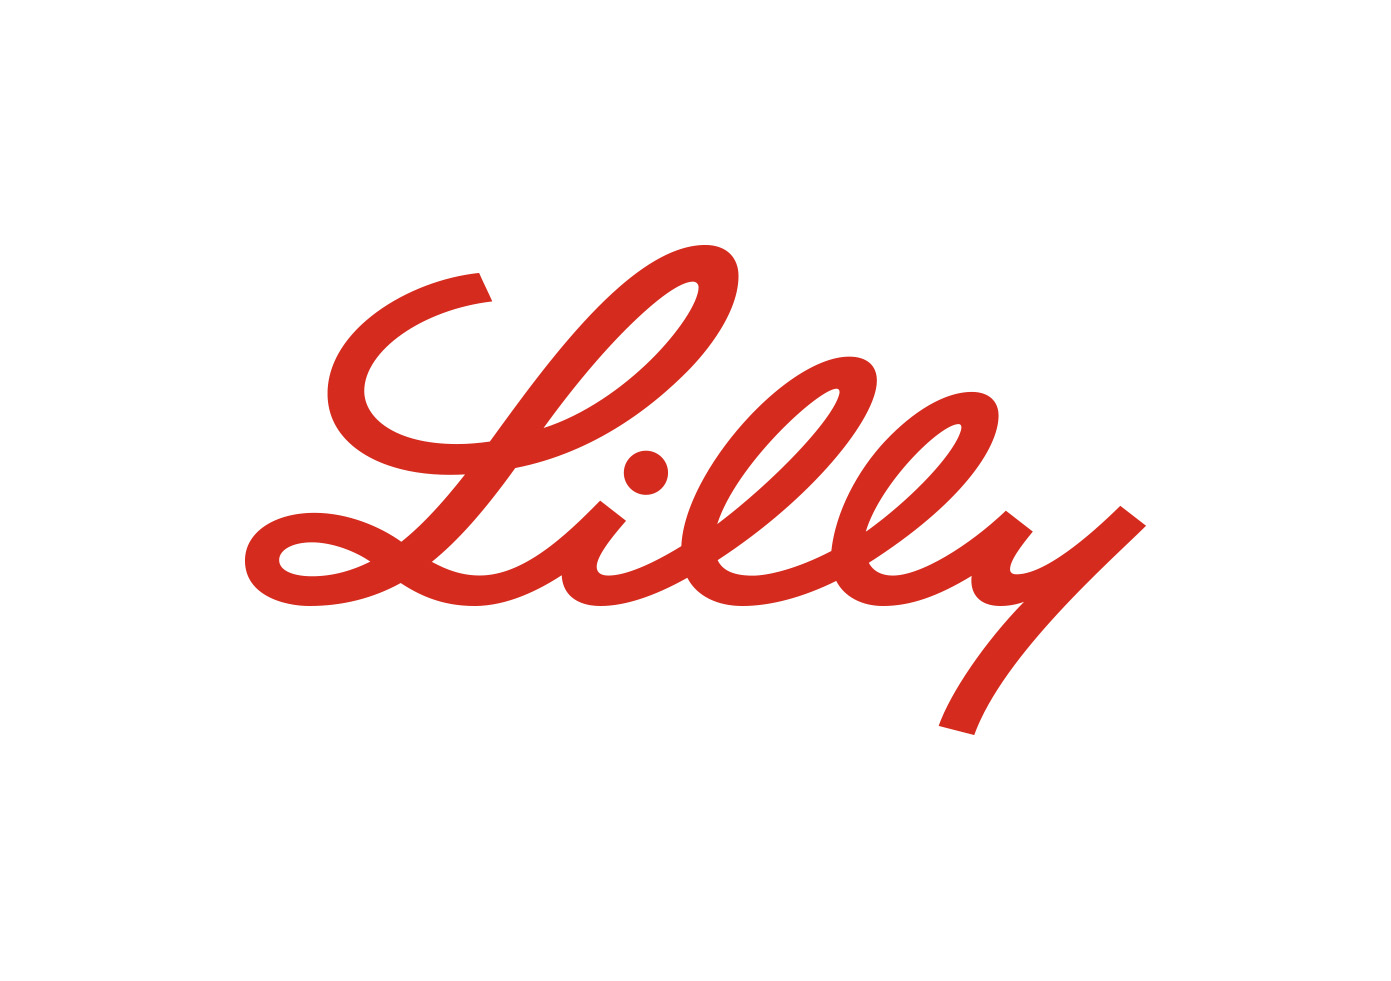 A. Eli Lilly and Company (Presenting)